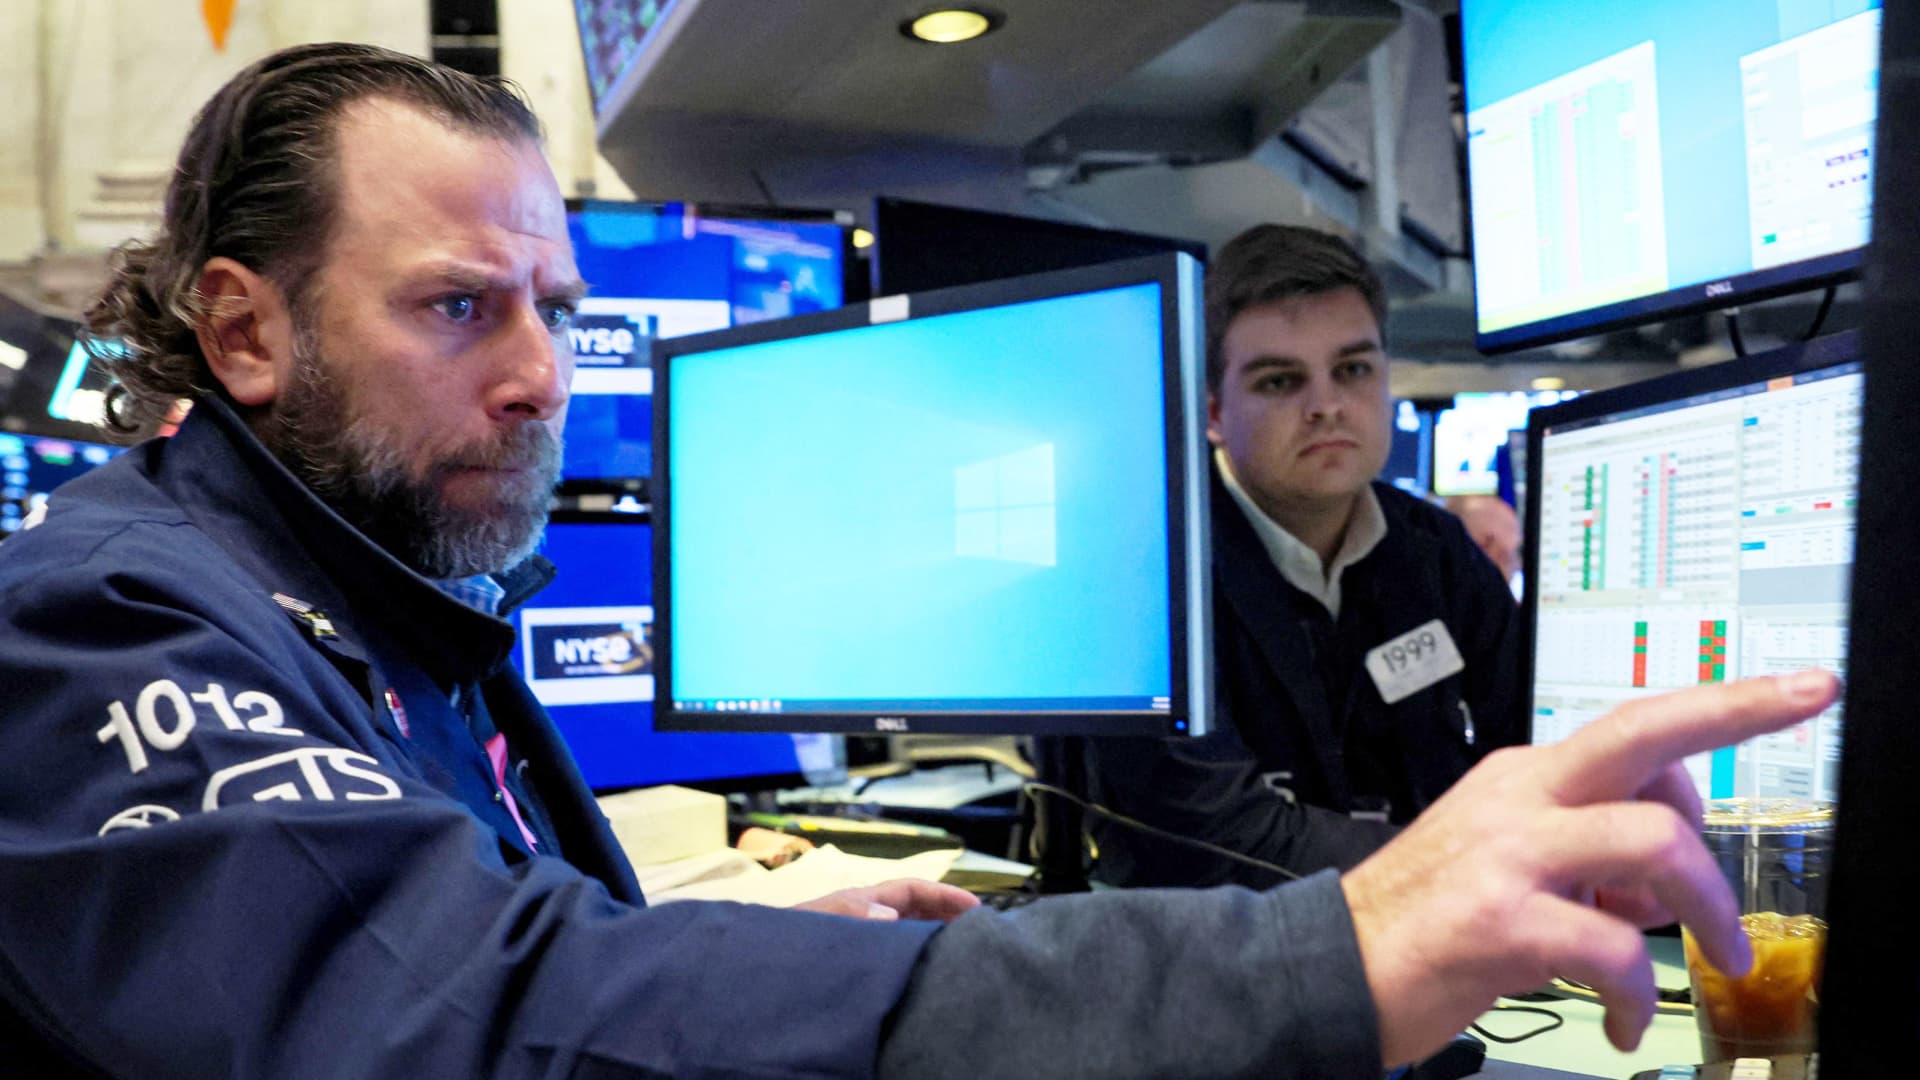 Professional traders are using these ETFs and options to hedge risk in the volatile market